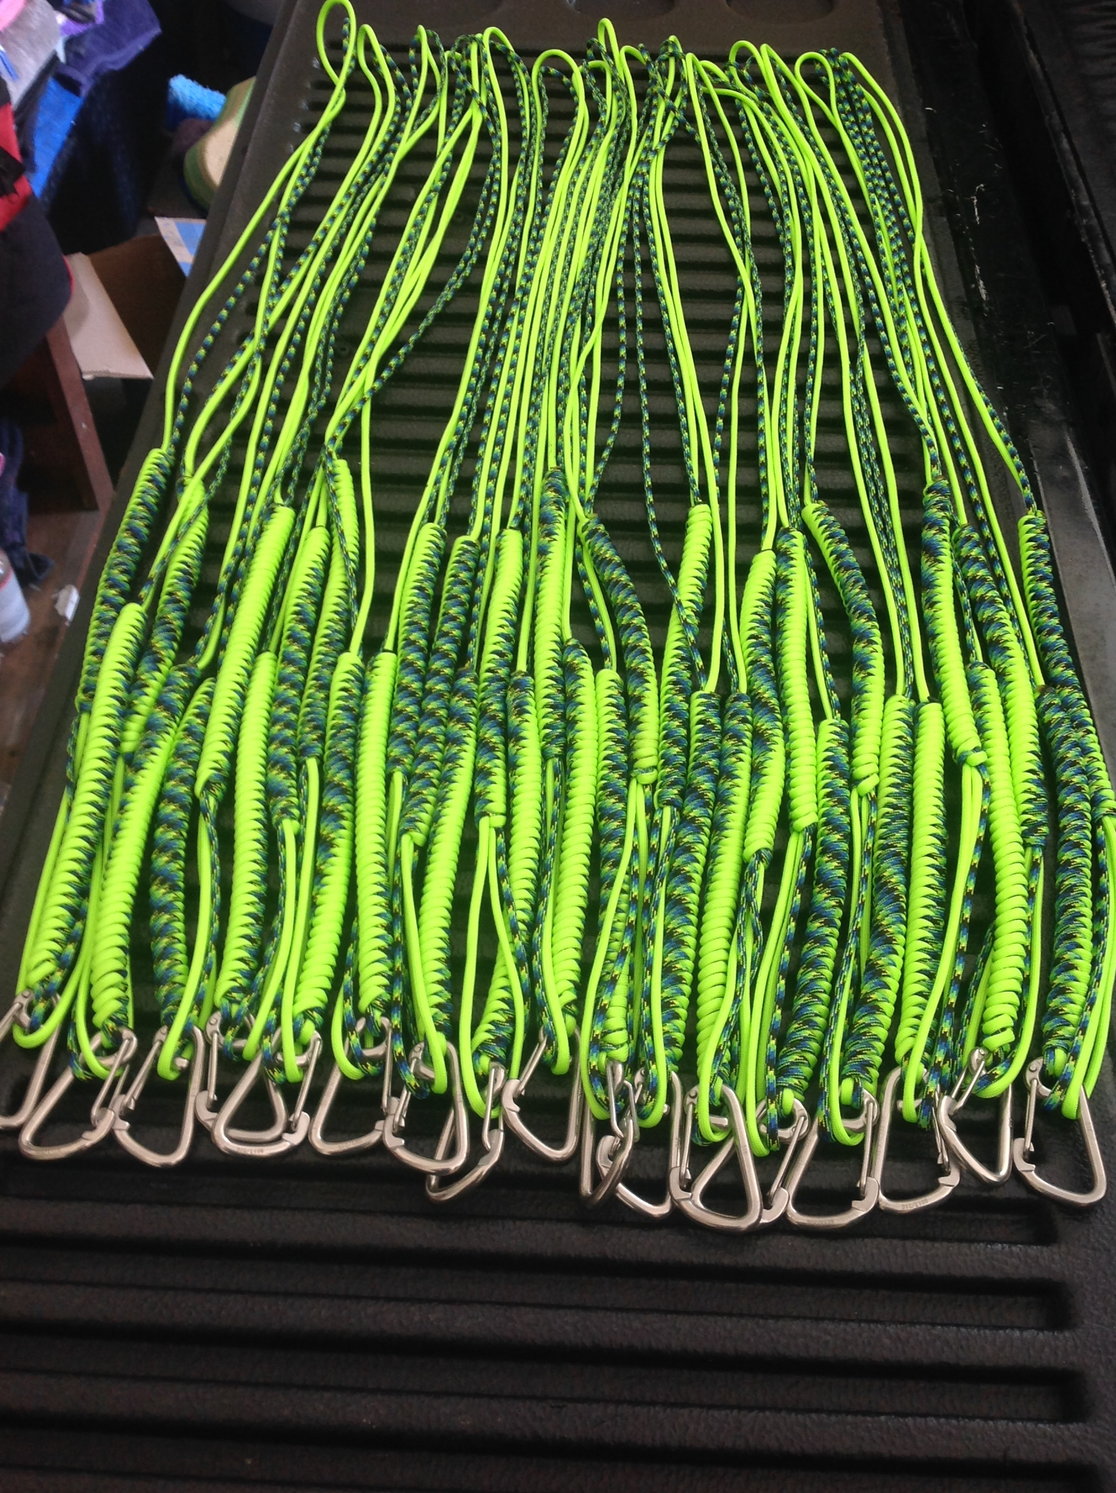 Rod leashes 6' $16.99 each,shipping is free - The Hull Truth